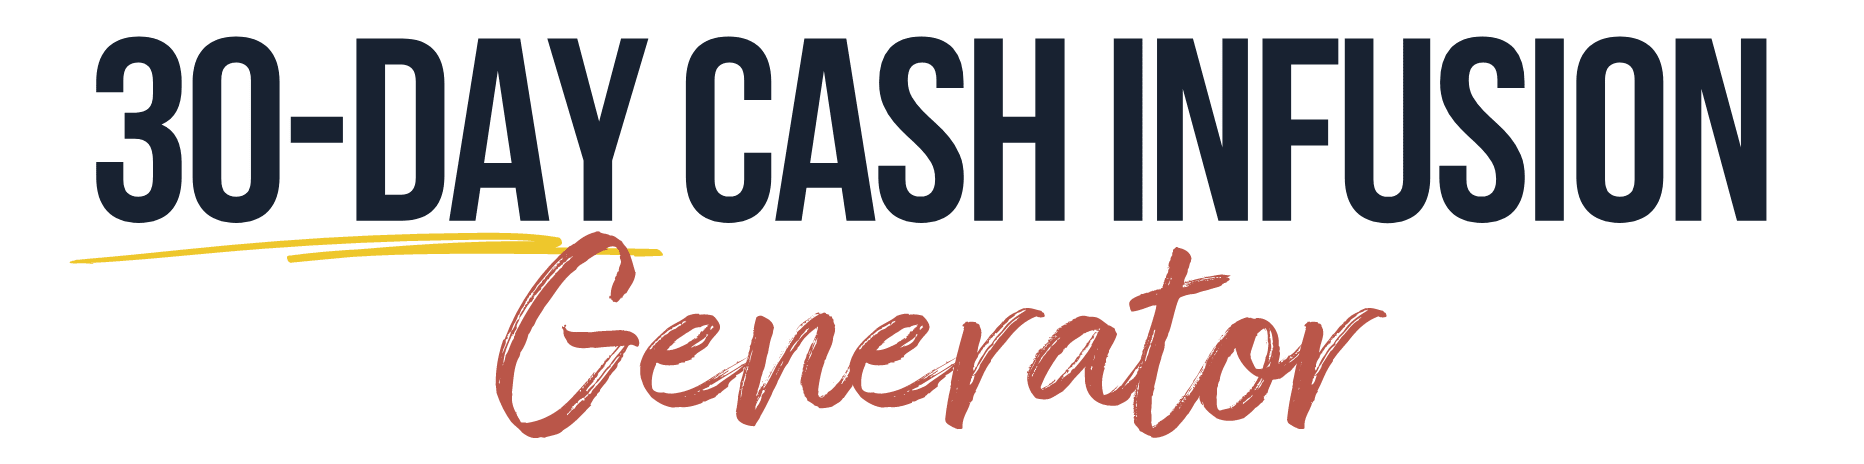 30-Day Cash Infusion Generator